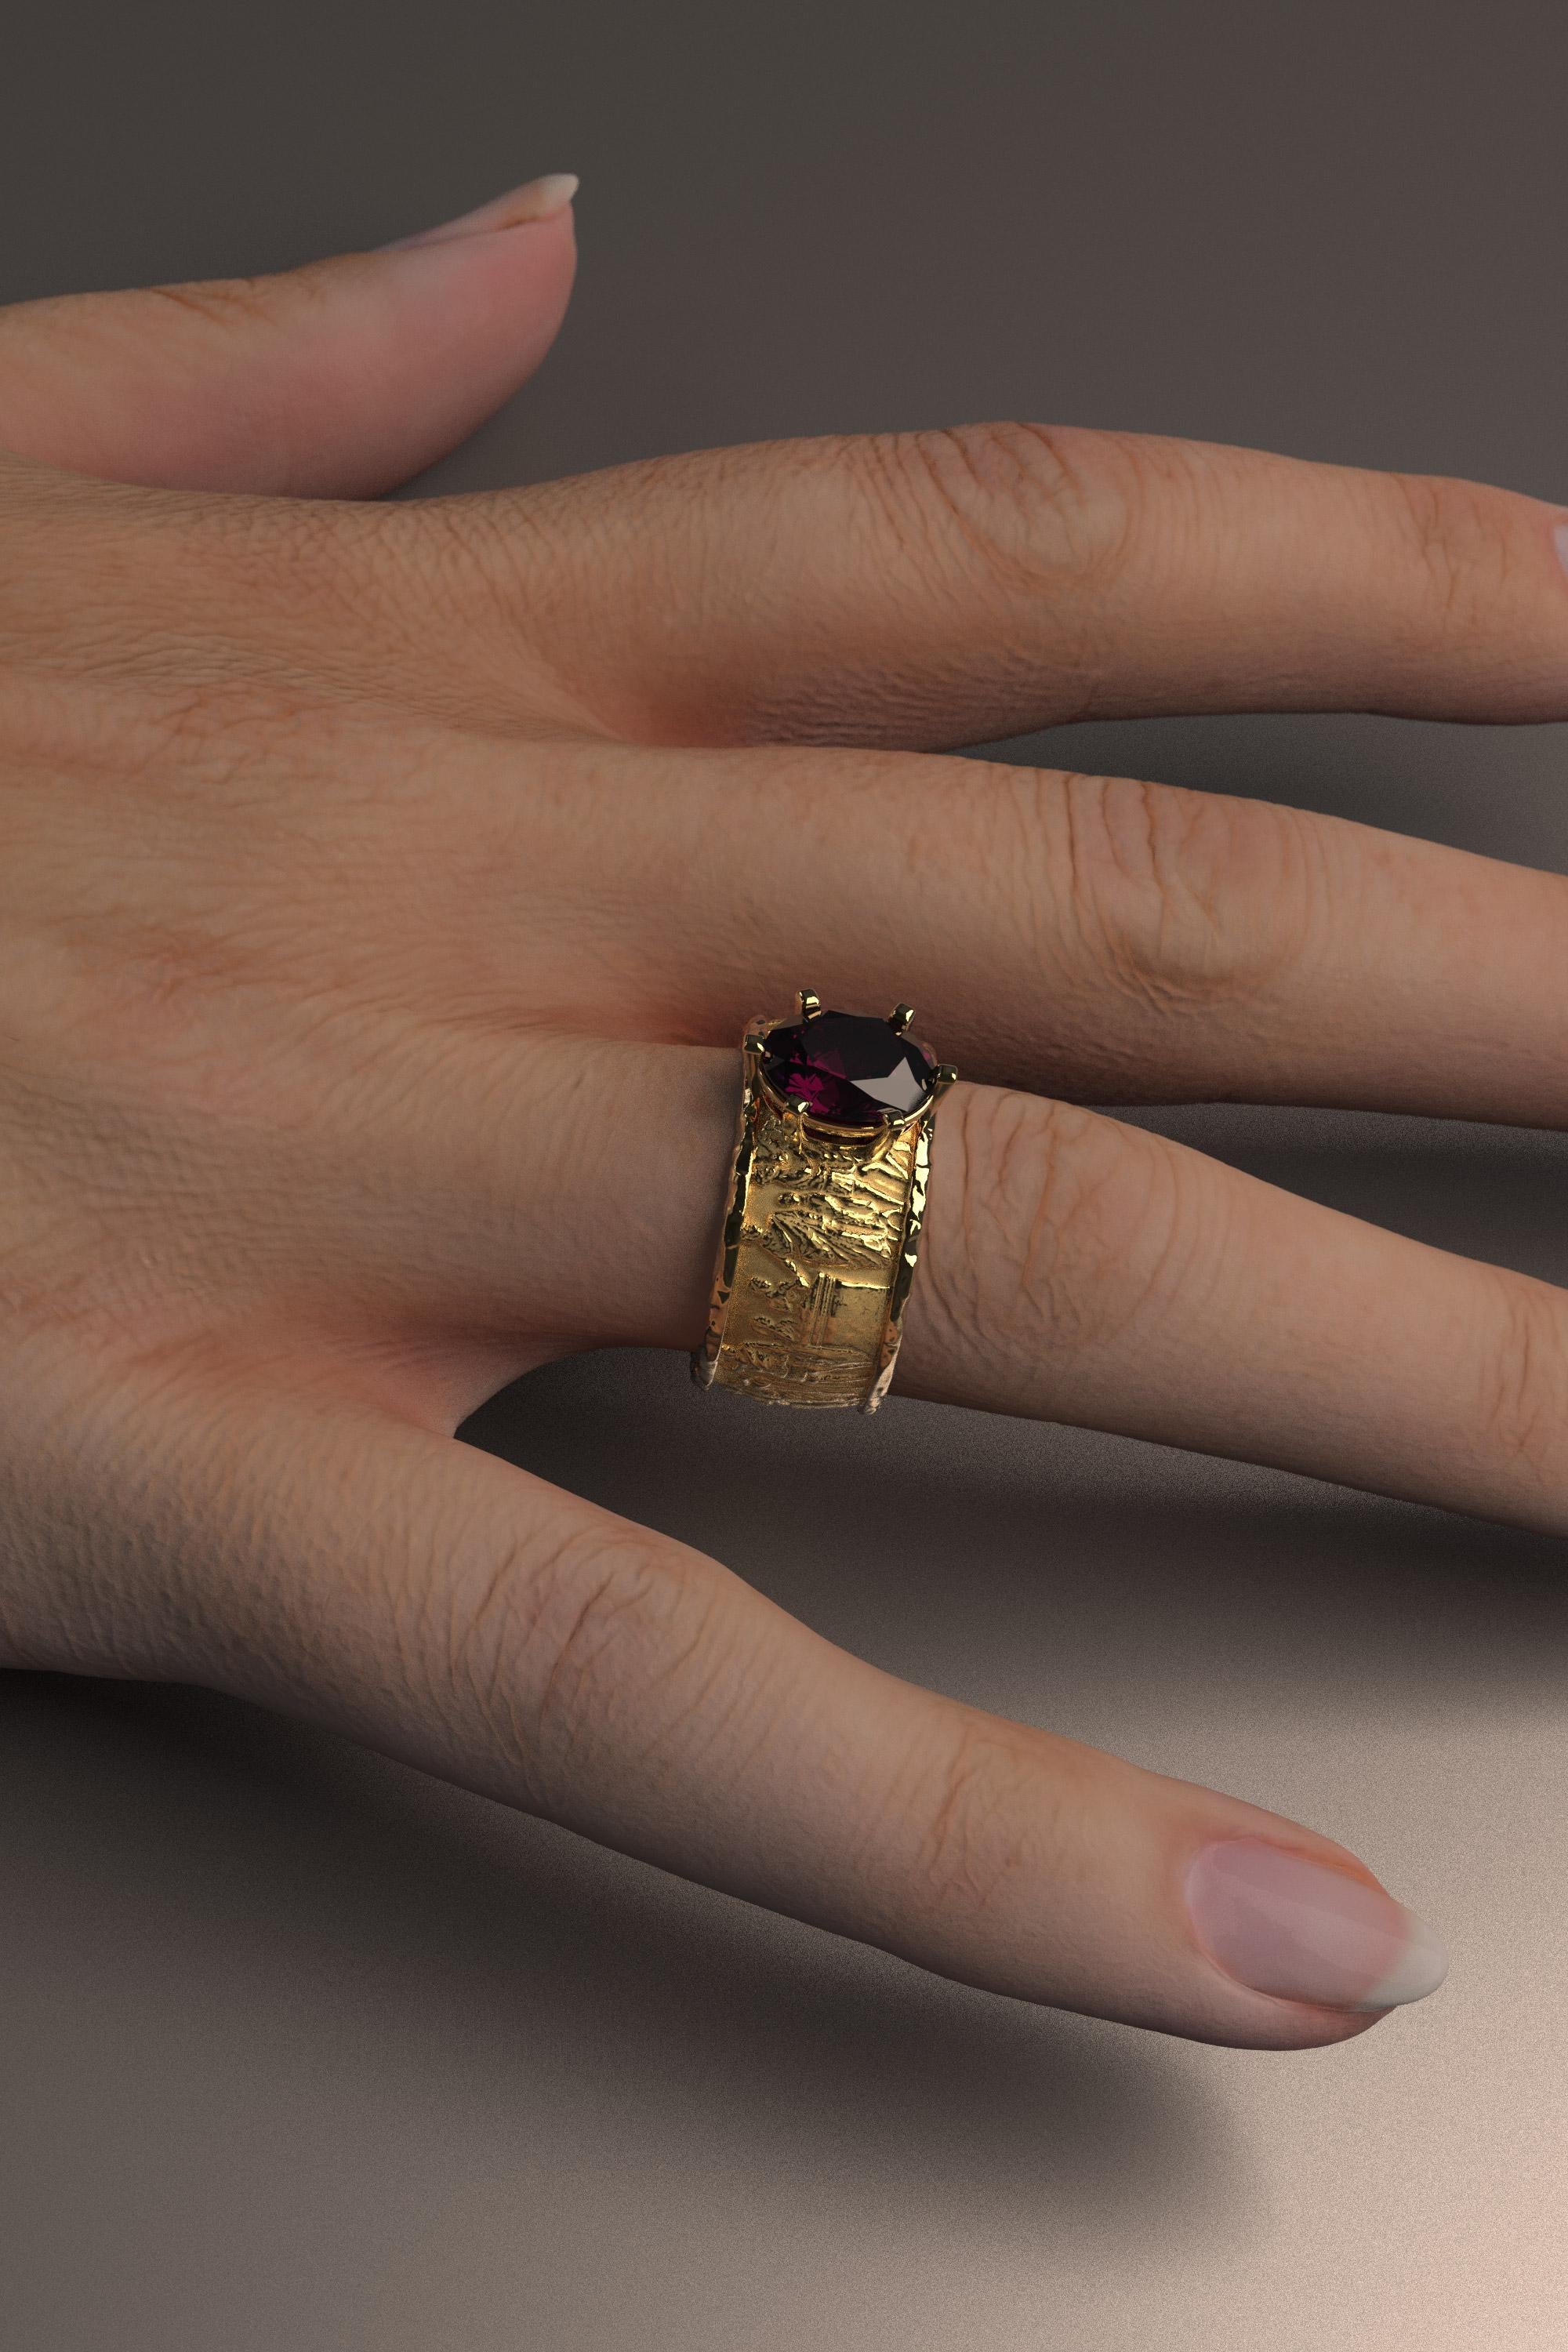 For Sale:  Natural Purple Garnet Ring in 14k Gold Made in Italy, for Men or for Women 7